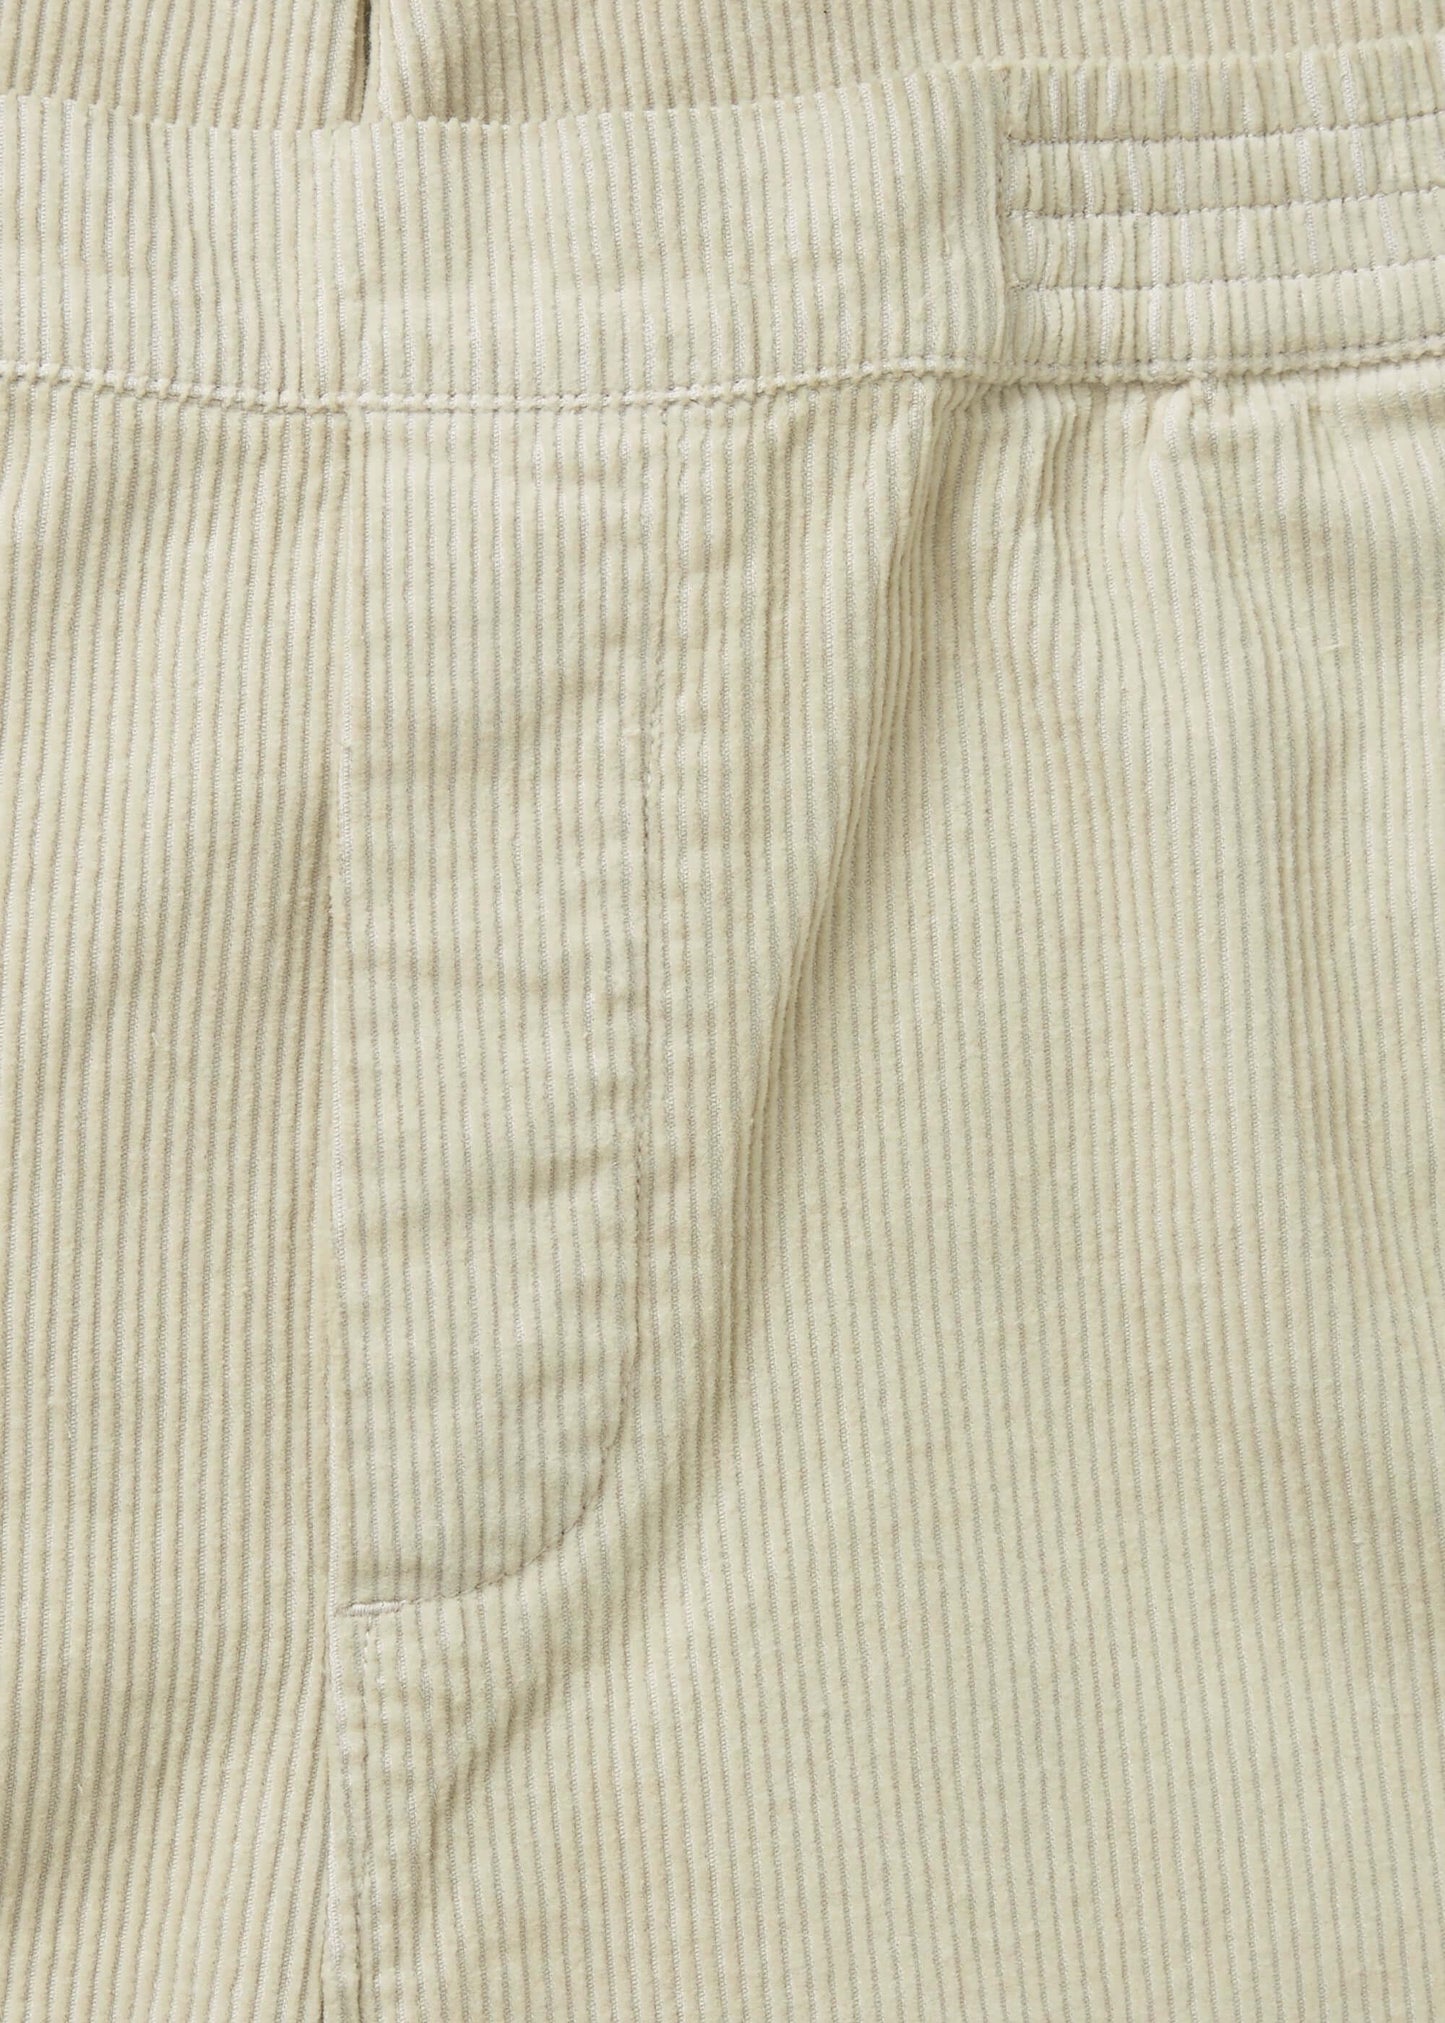 Aiayu "Coco Pant Corduroy" Fossil